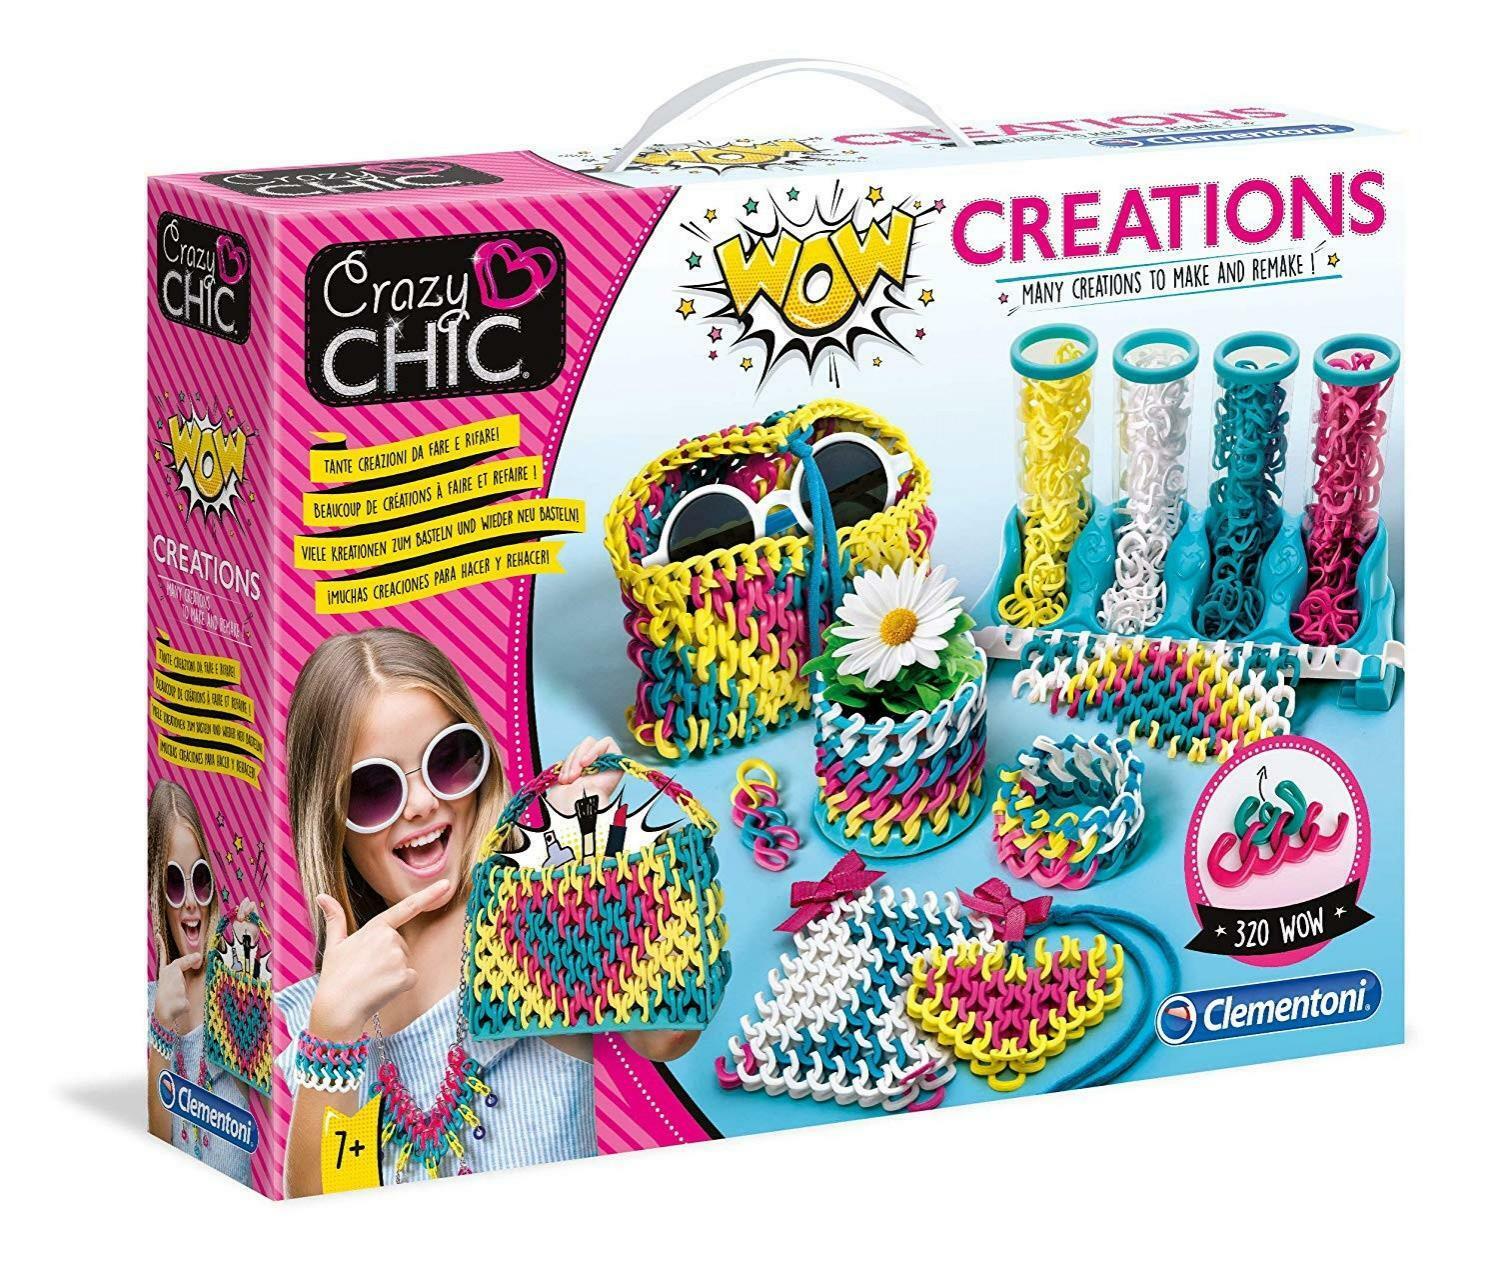 clementoni crazy chic - wow creations 18540